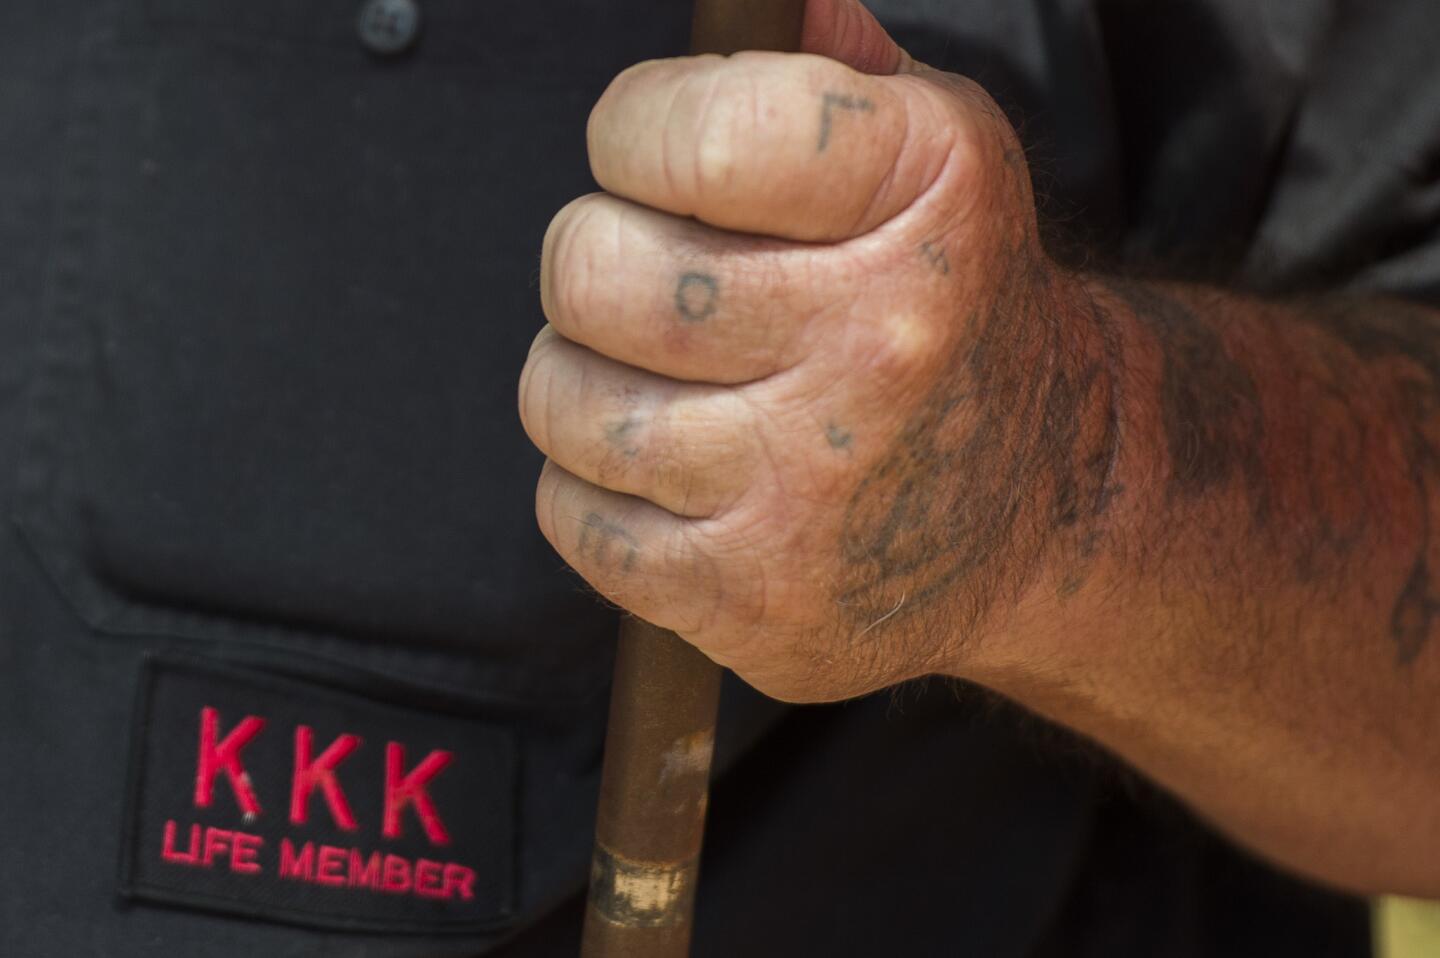 A member of the Ku Klux Klan, with the word "Love" tattooed on his fingers, holds a flag during a rally, calling for the protection of Southern Confederate monuments, in Charlottesville, Virginia on July 8, 2017.